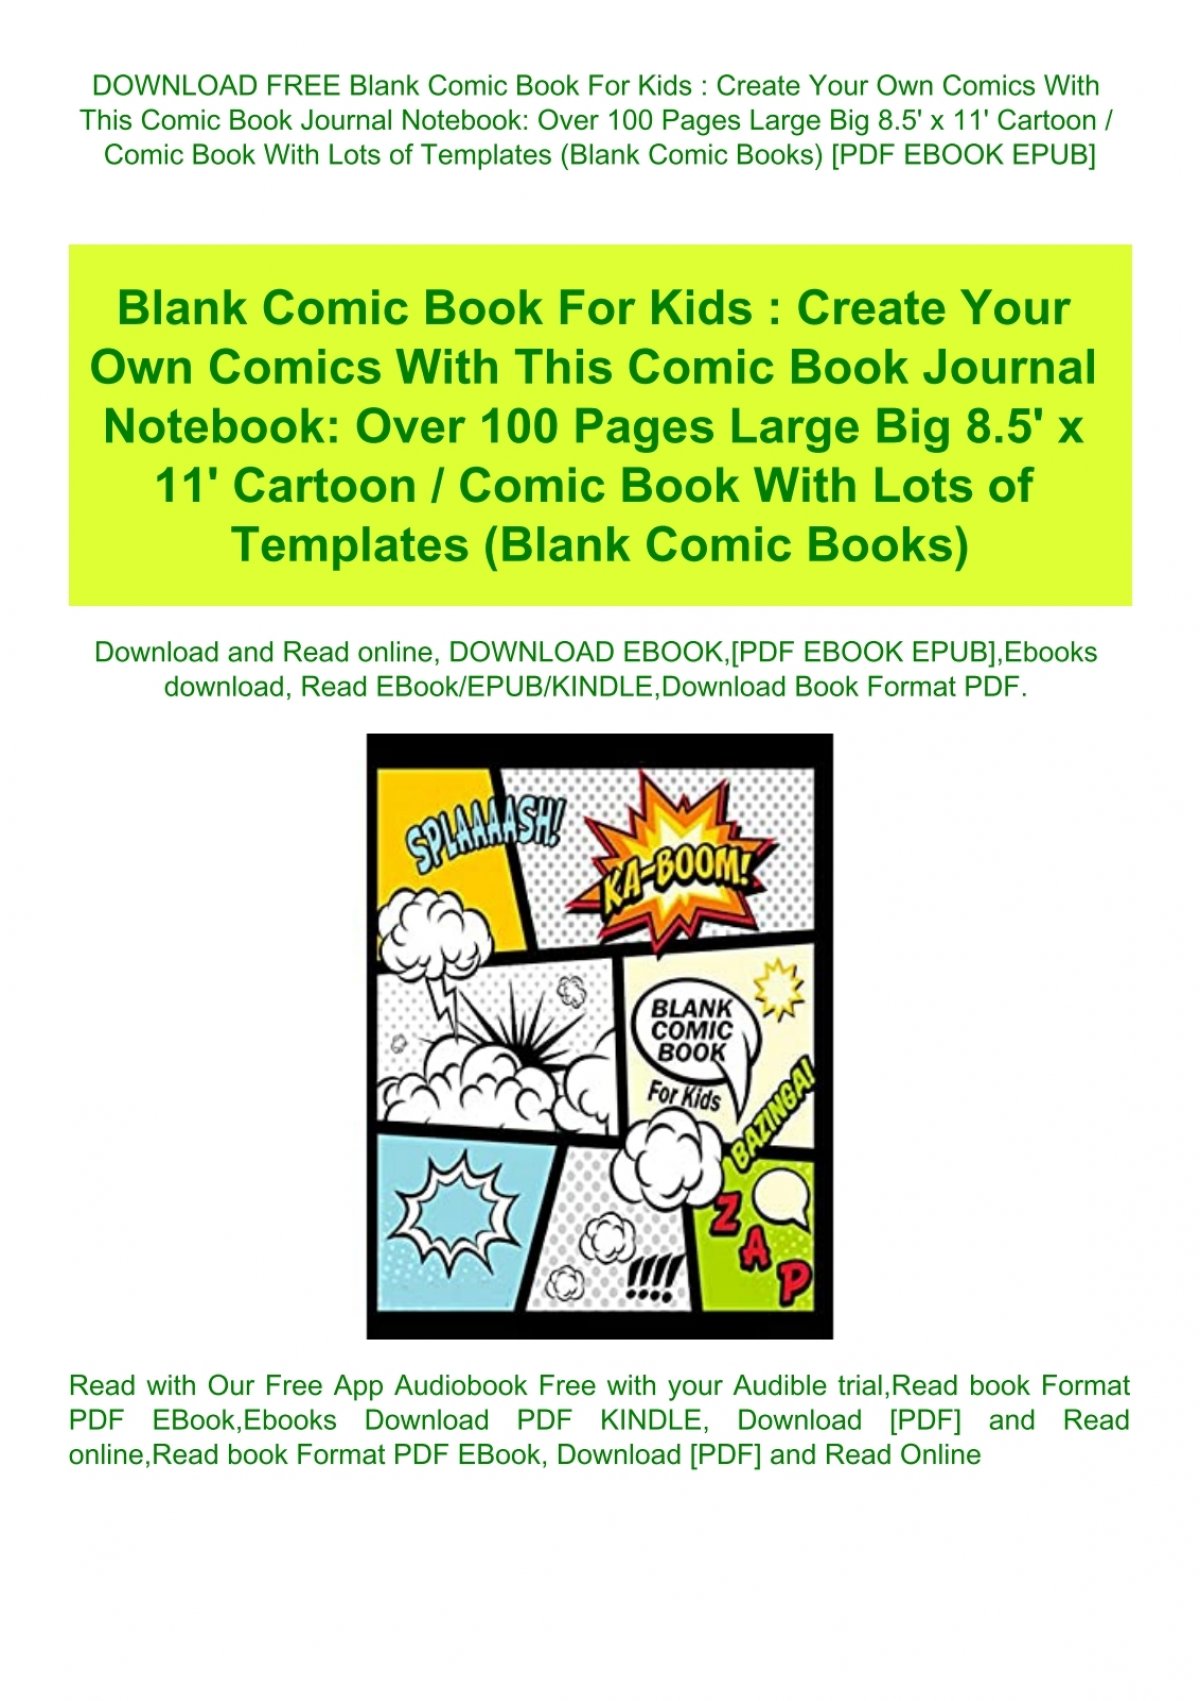 Download Free Blank Comic Book For Kids Create Your Own Comics With This Comic Book Journal Notebook Over 100 Pages Large Big 8 5 Amp Amp 039 X 11 Amp Amp 039 Cartoon Comic Book With Lots Of Templates